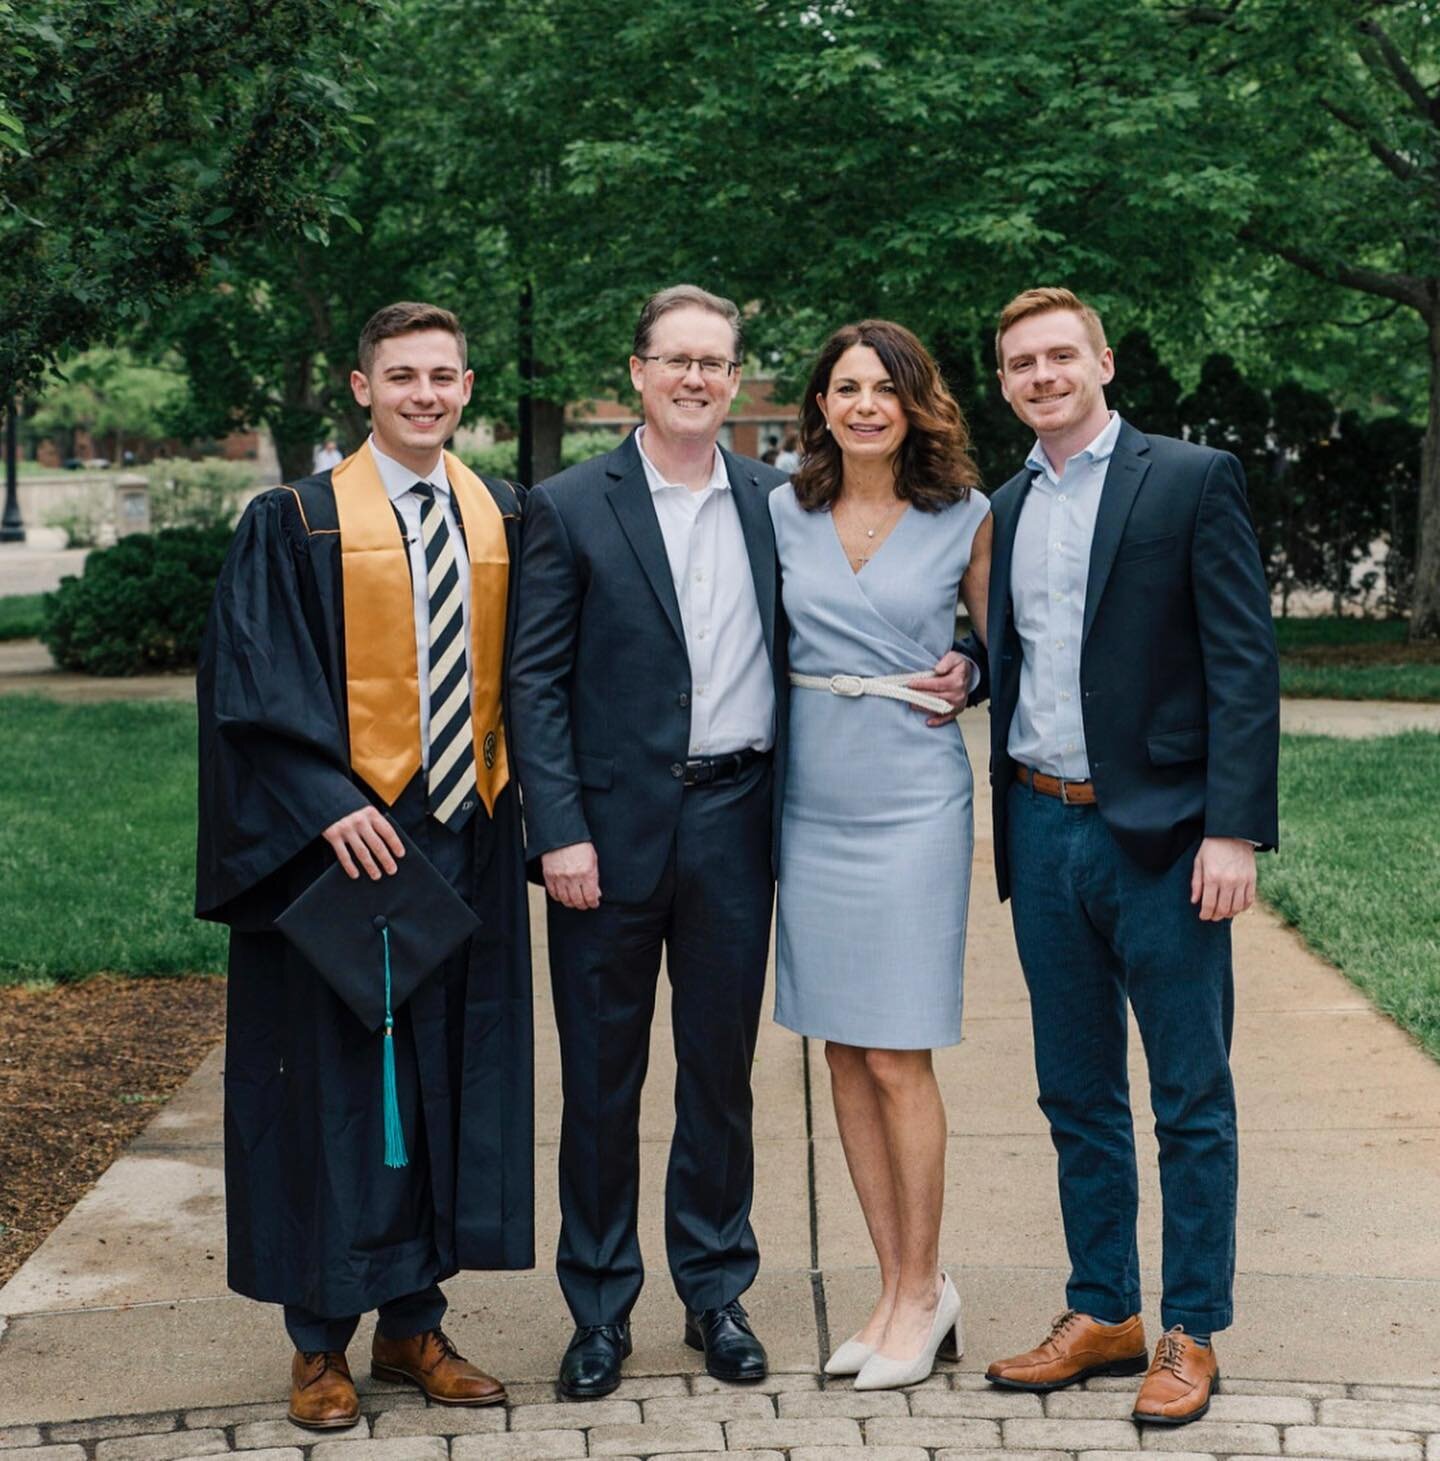 Purdue Graduation! Celebrating as a family by including time for family pictures is a great thing. Freezing time and capturing this milestone. 

@lifeatpurdue 

#heathercorbinphotography #westlafayetteindiana #purdueuniversity #purduegraduationphotog